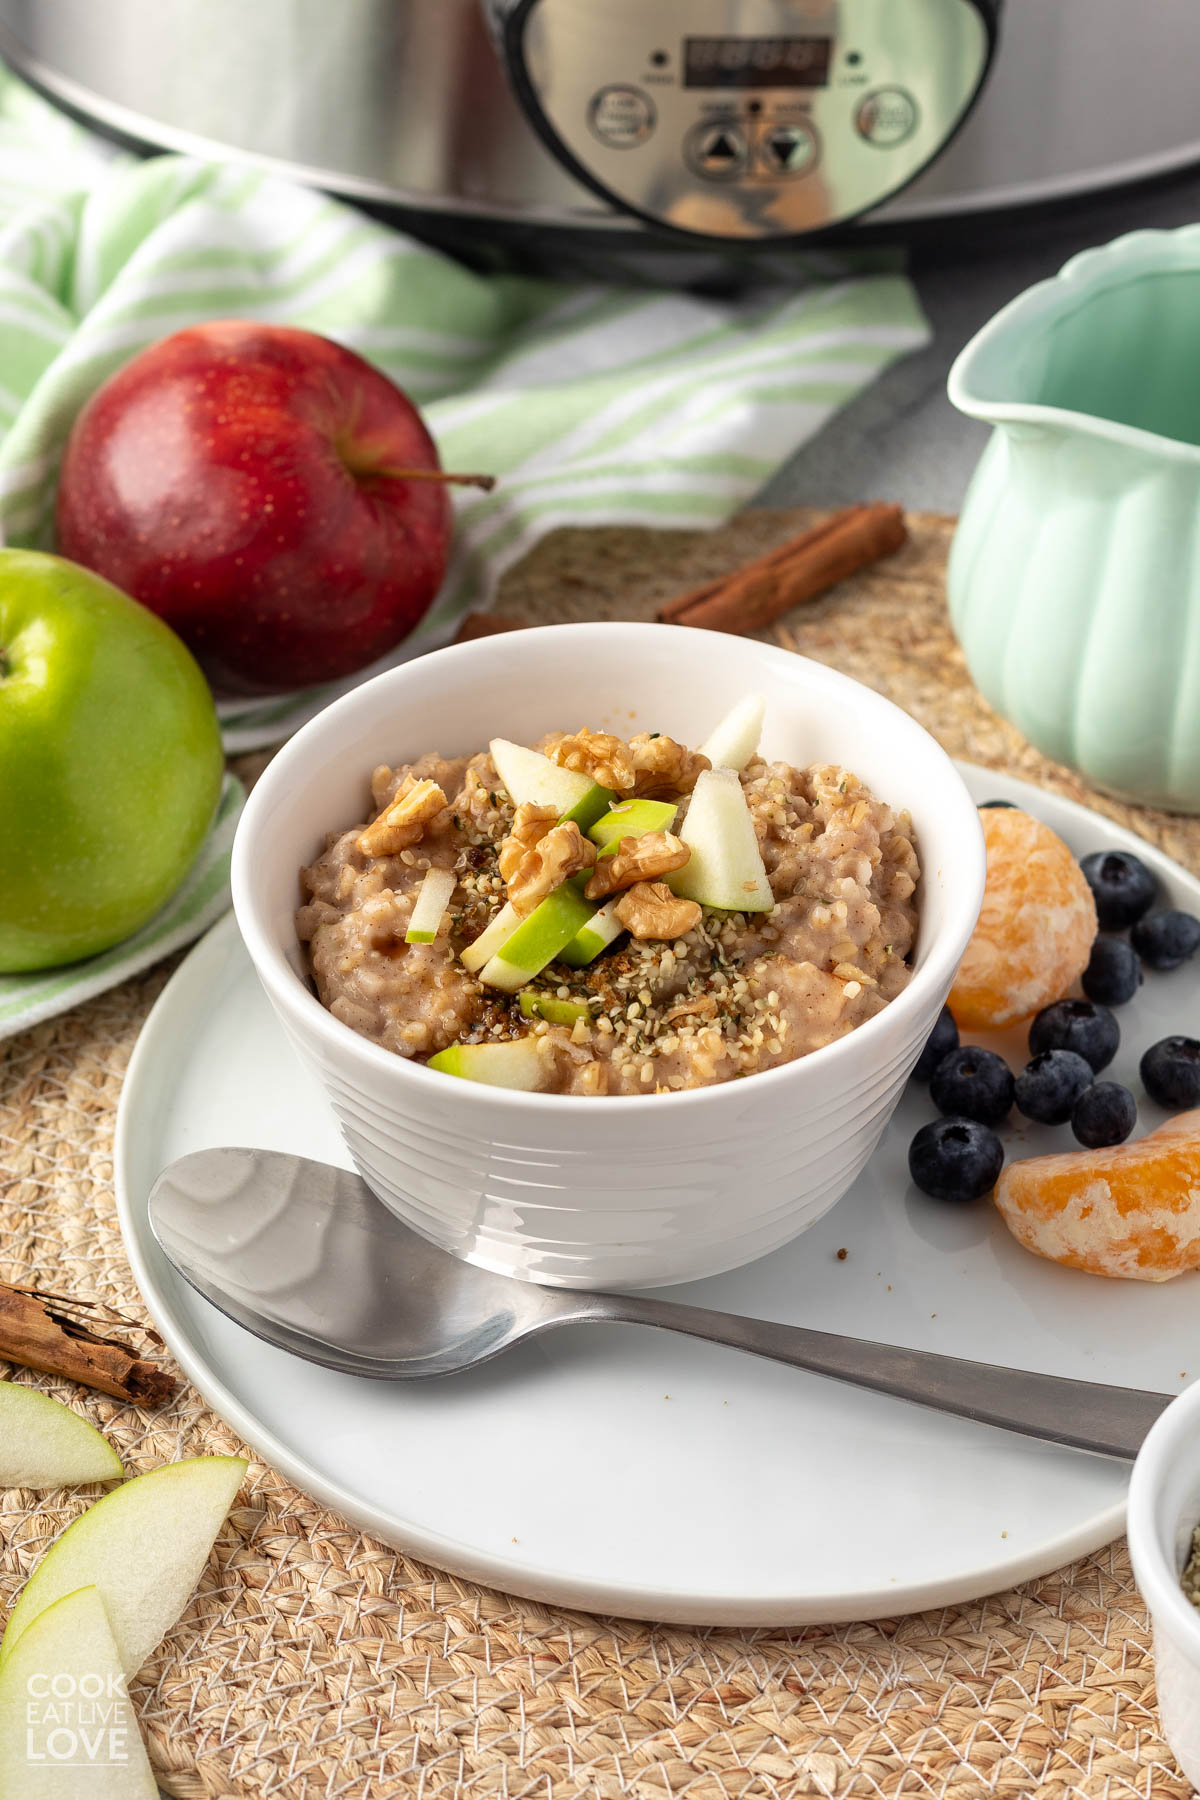 A bowl of apple oatmeal on the table with a slow cooker in the background.